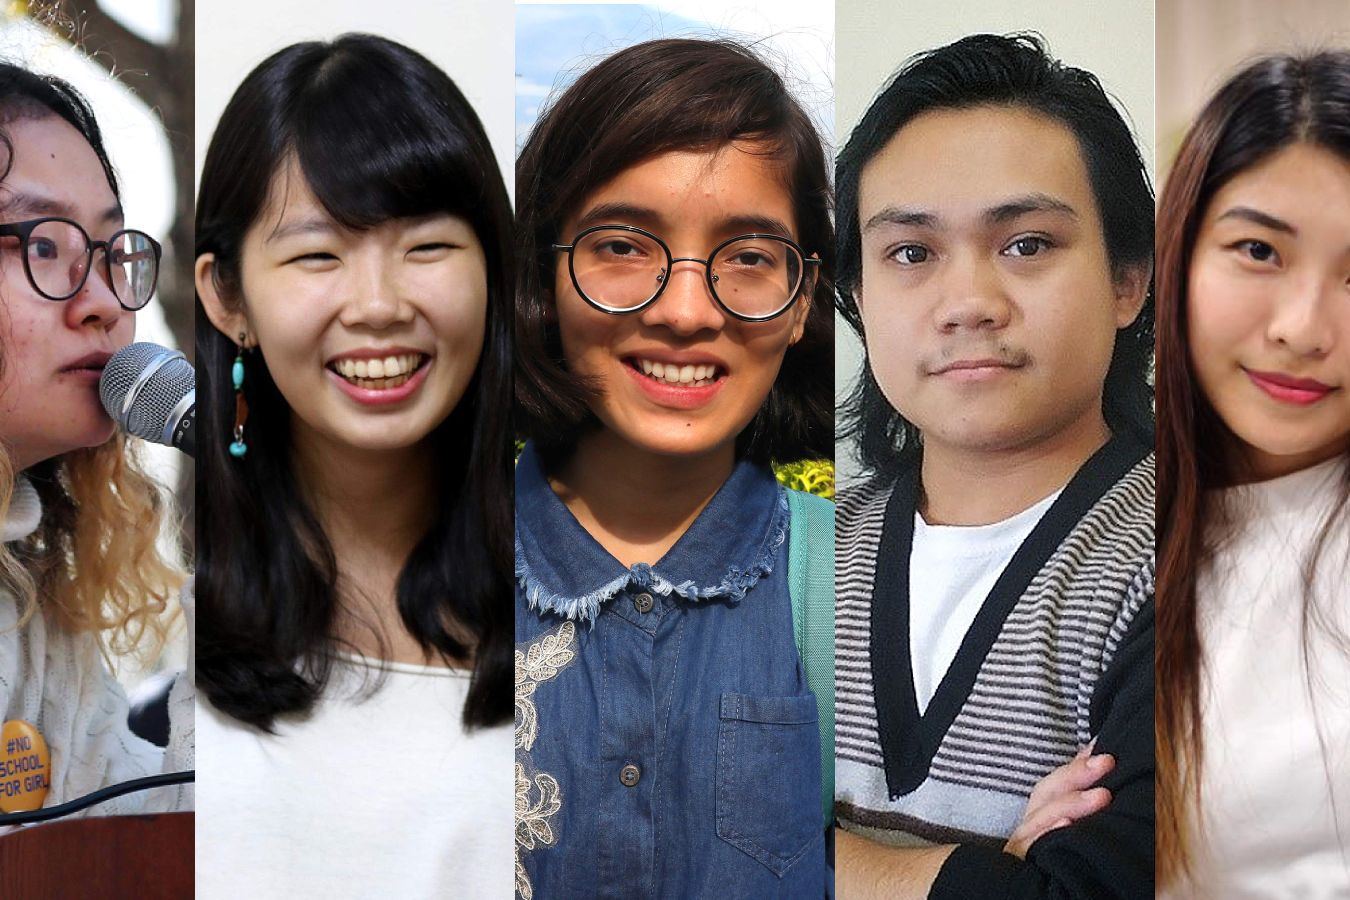 Meet 5 young activists who drove change in Asia this year | CNN